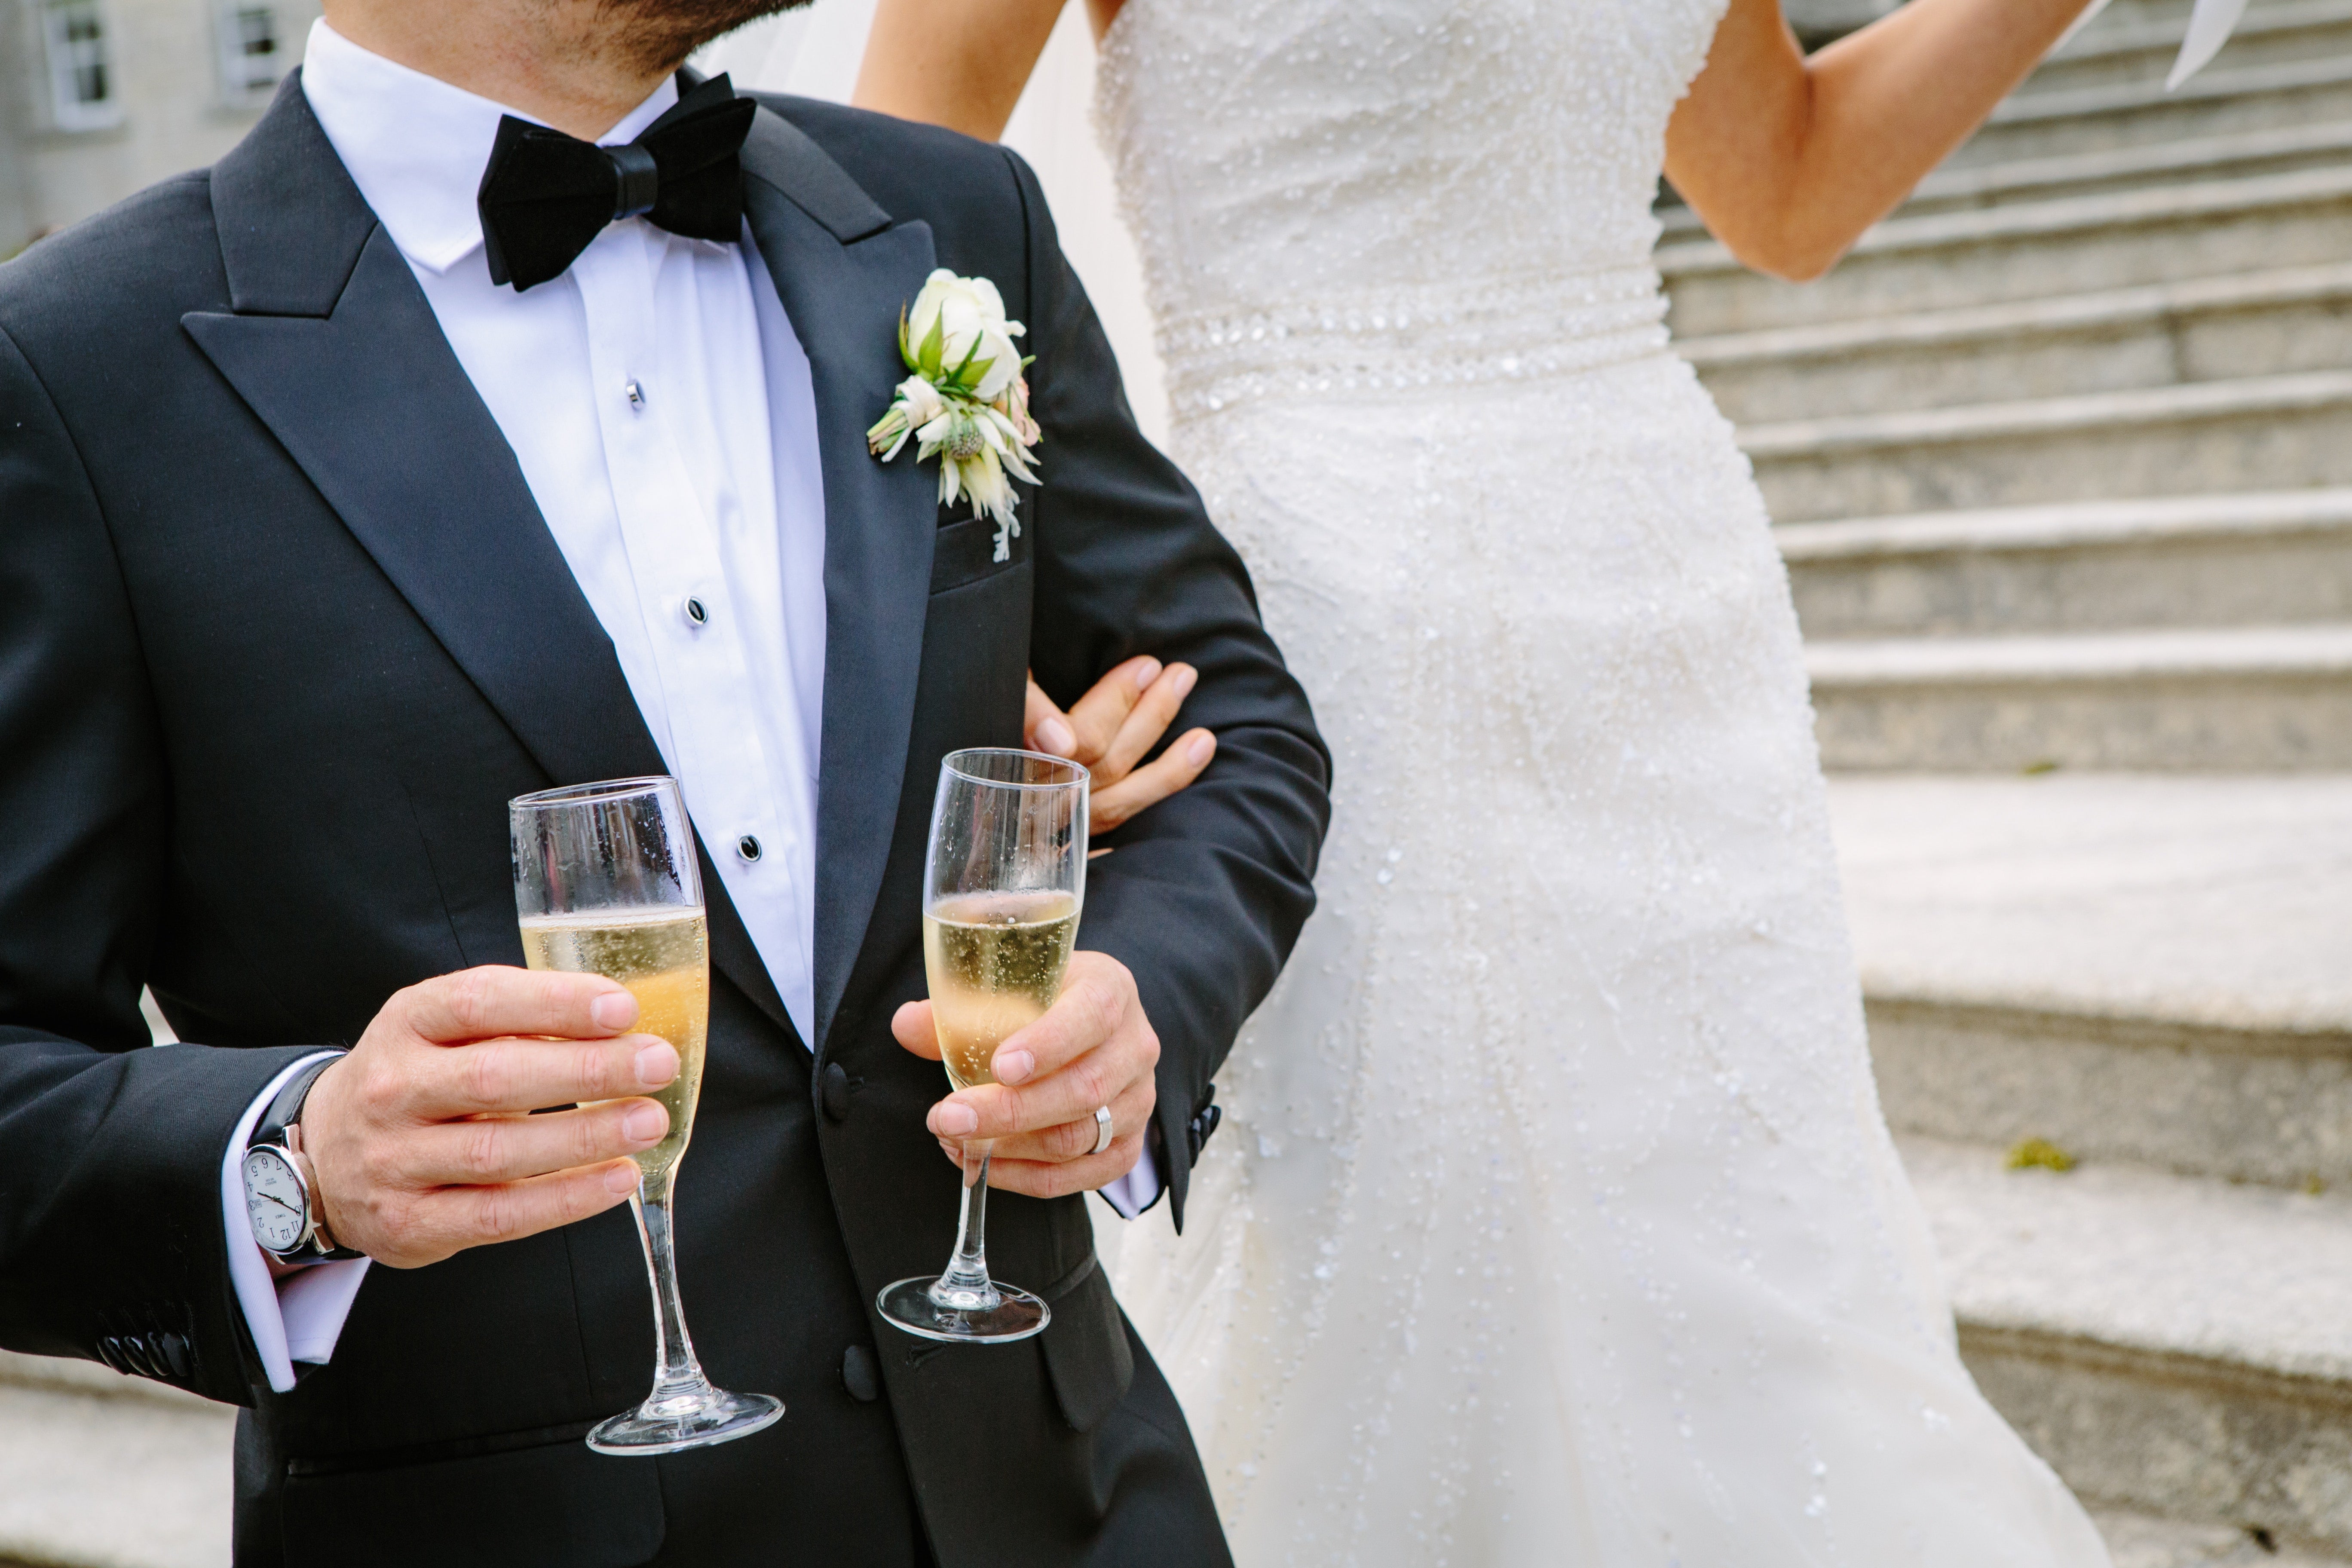 What is the appropriate dress code for the wedding party suits?